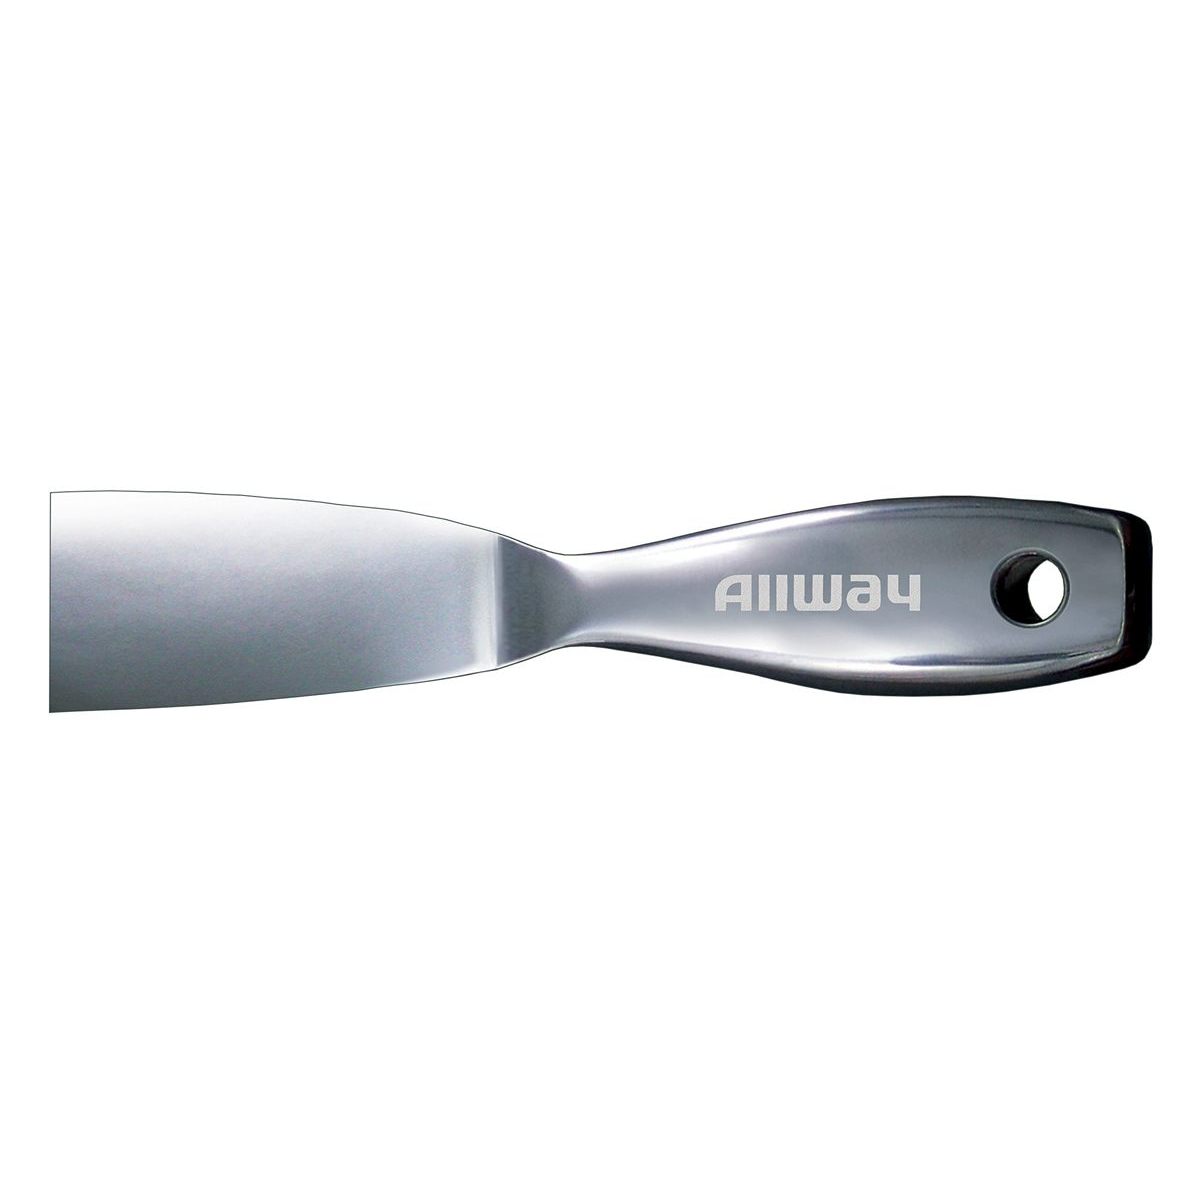 UX15F) 1-½ One-Piece Stainless Steel Pro Putty Knife, Labelled